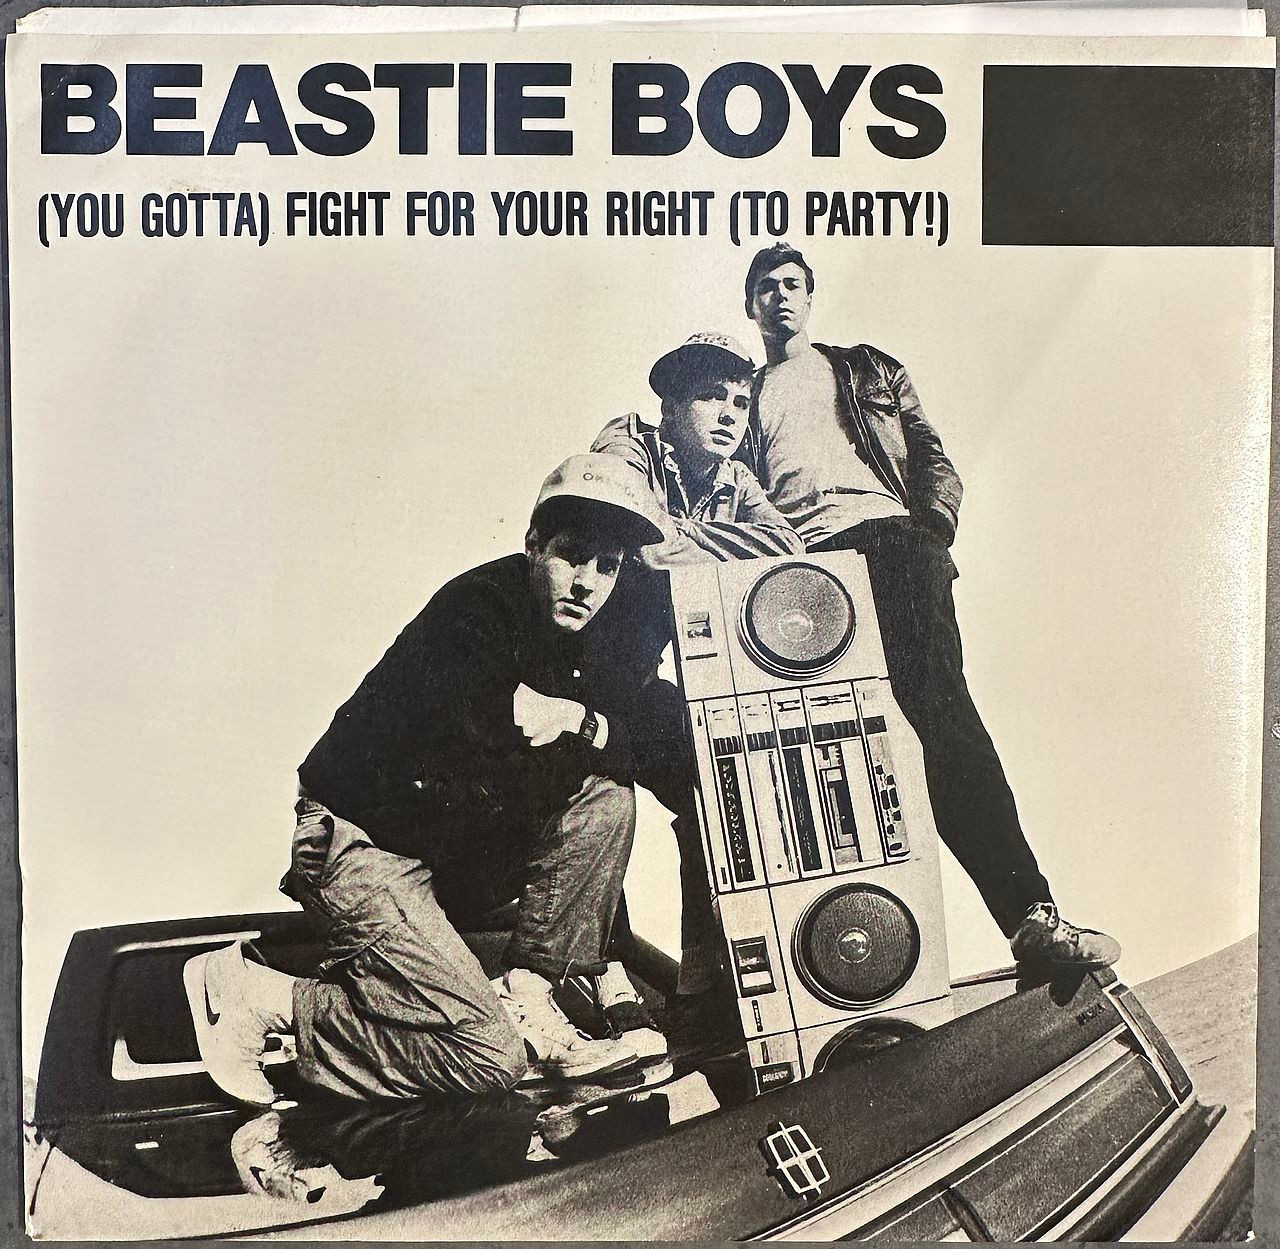 Beastie Boys – (You Gotta) Fight For Your Right (To Party!) 7 